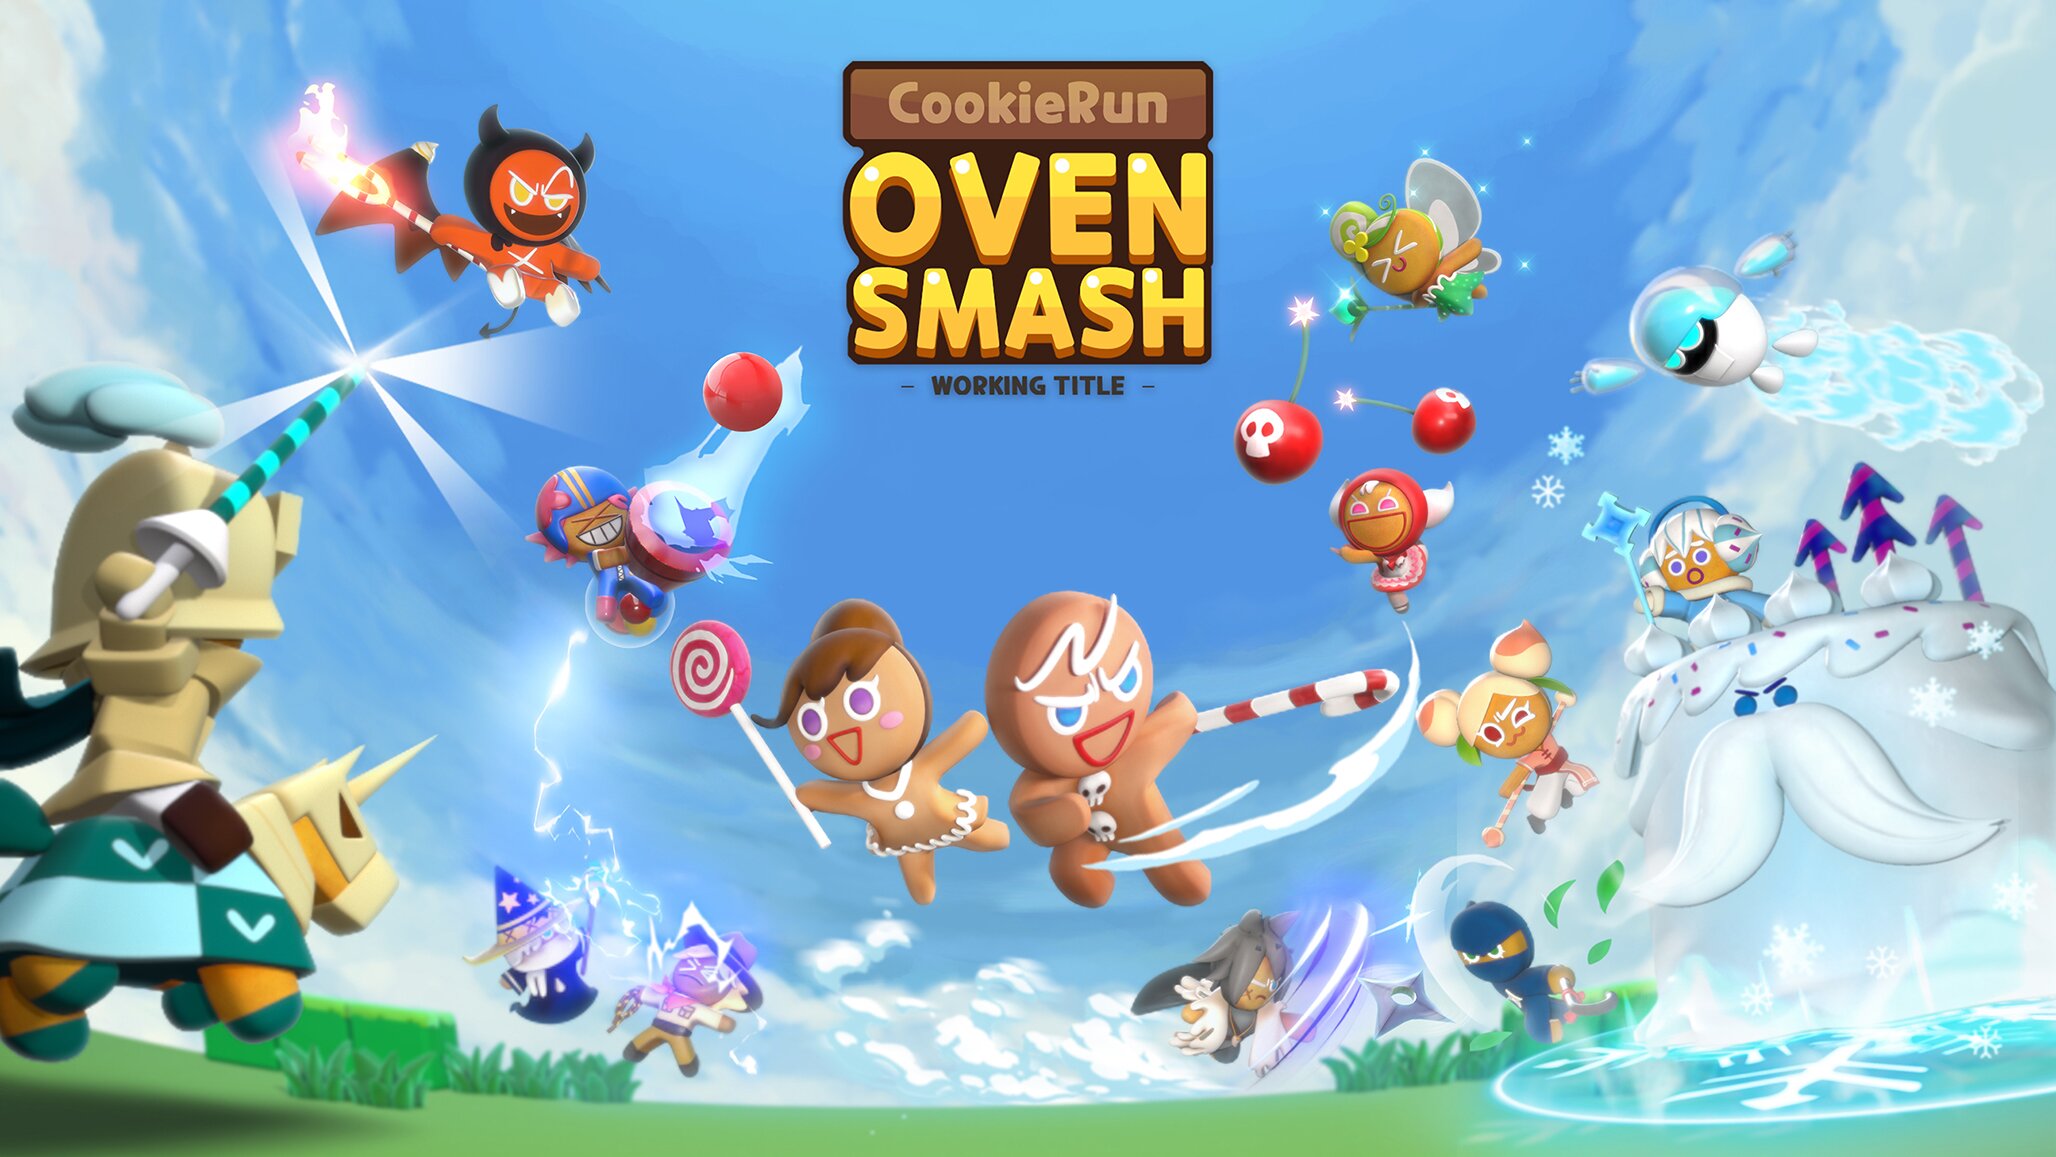 Another project that Press A is preparing for is Cookie Run: Oven Smash